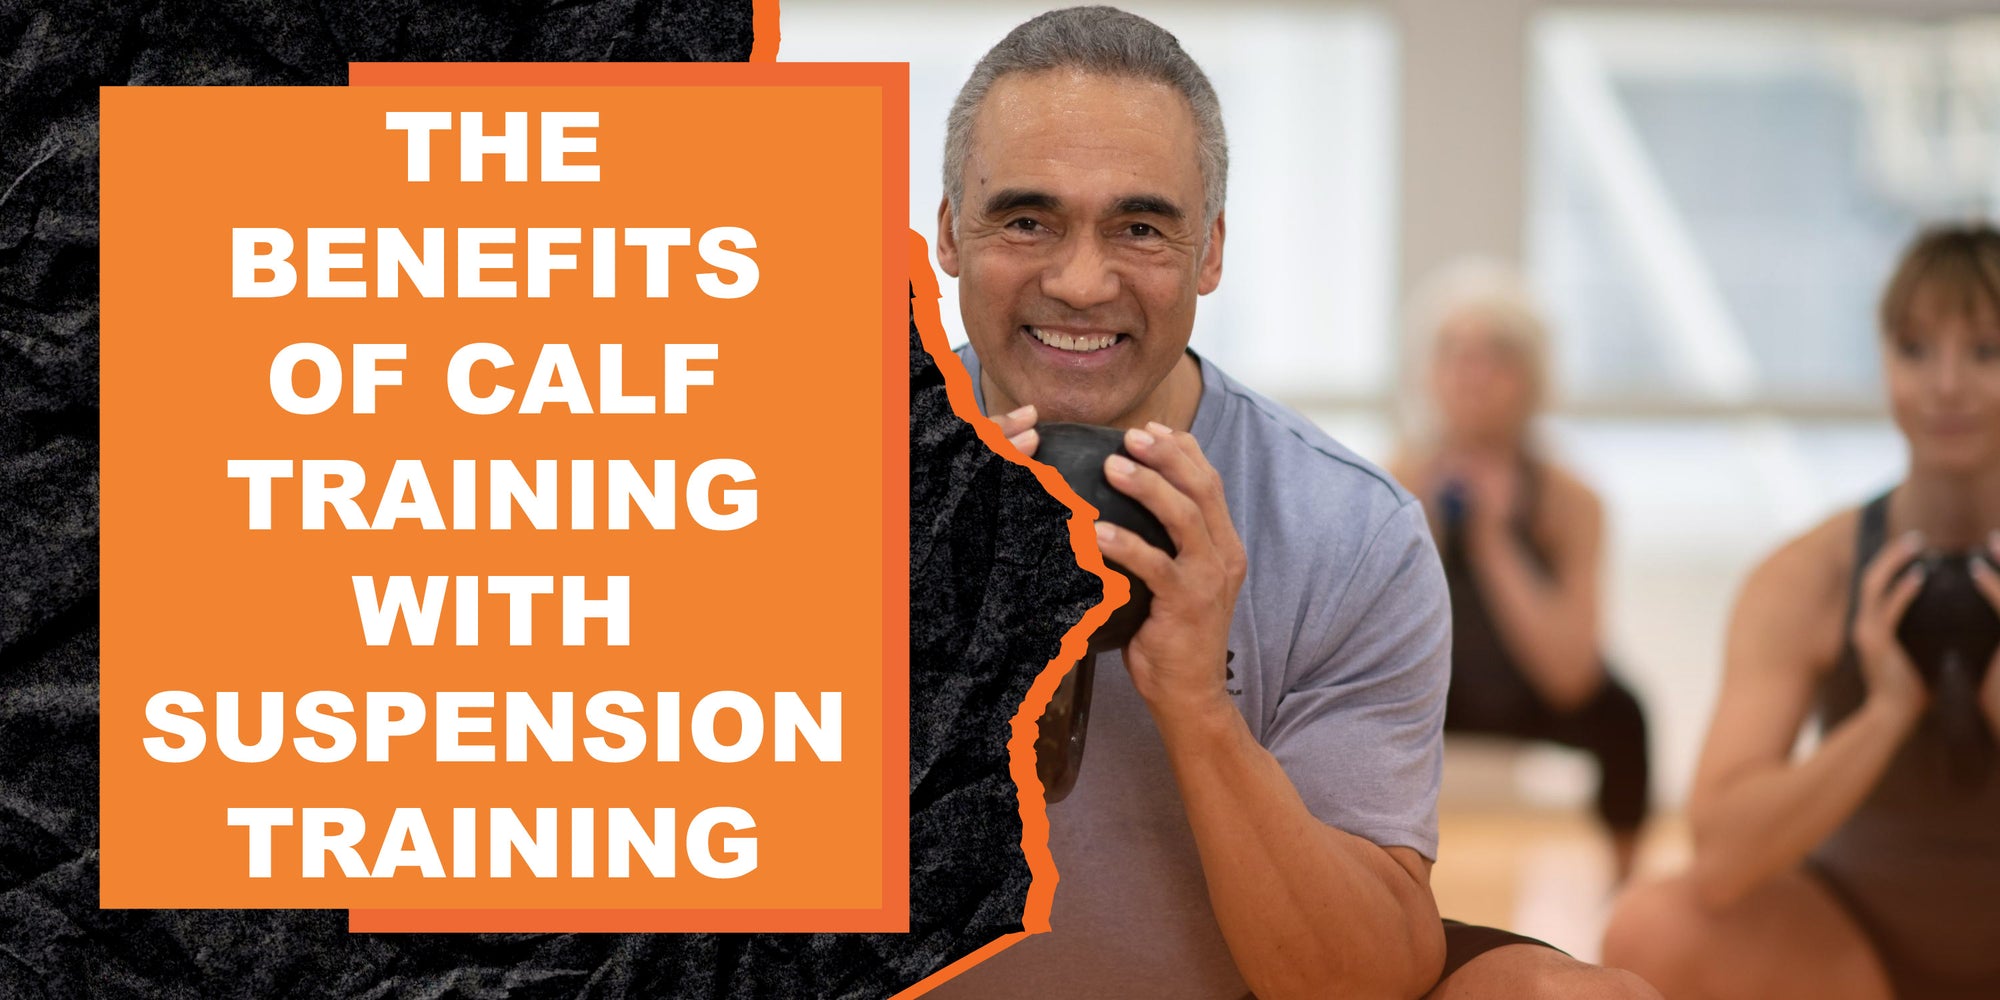 The Benefits of Calf Training with Suspension Training